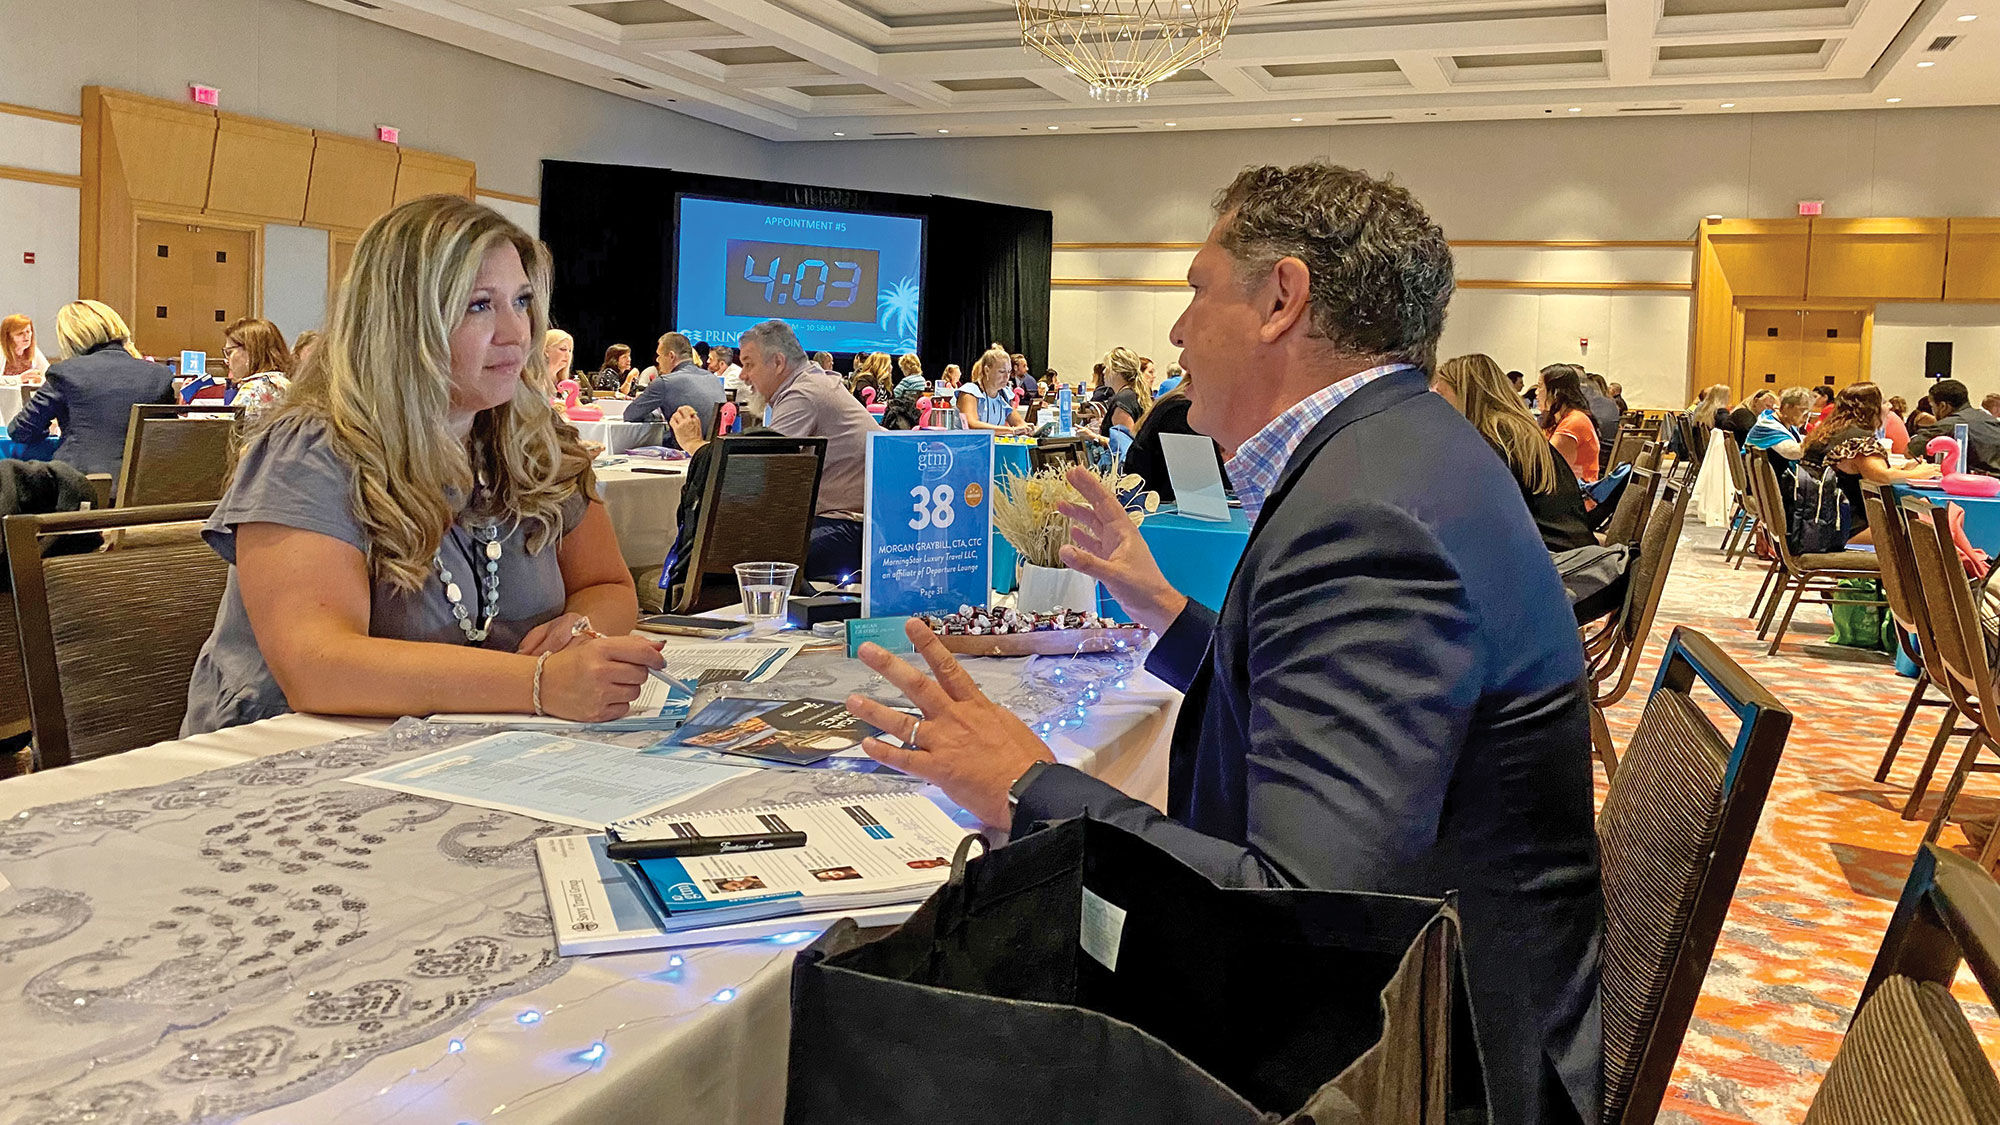 Morgan Graybill, owner of Morning Star Luxury Travel in Greenville, S.C., meets with a supplier at the Global Travel Marketplace in Hollywood, Fla.